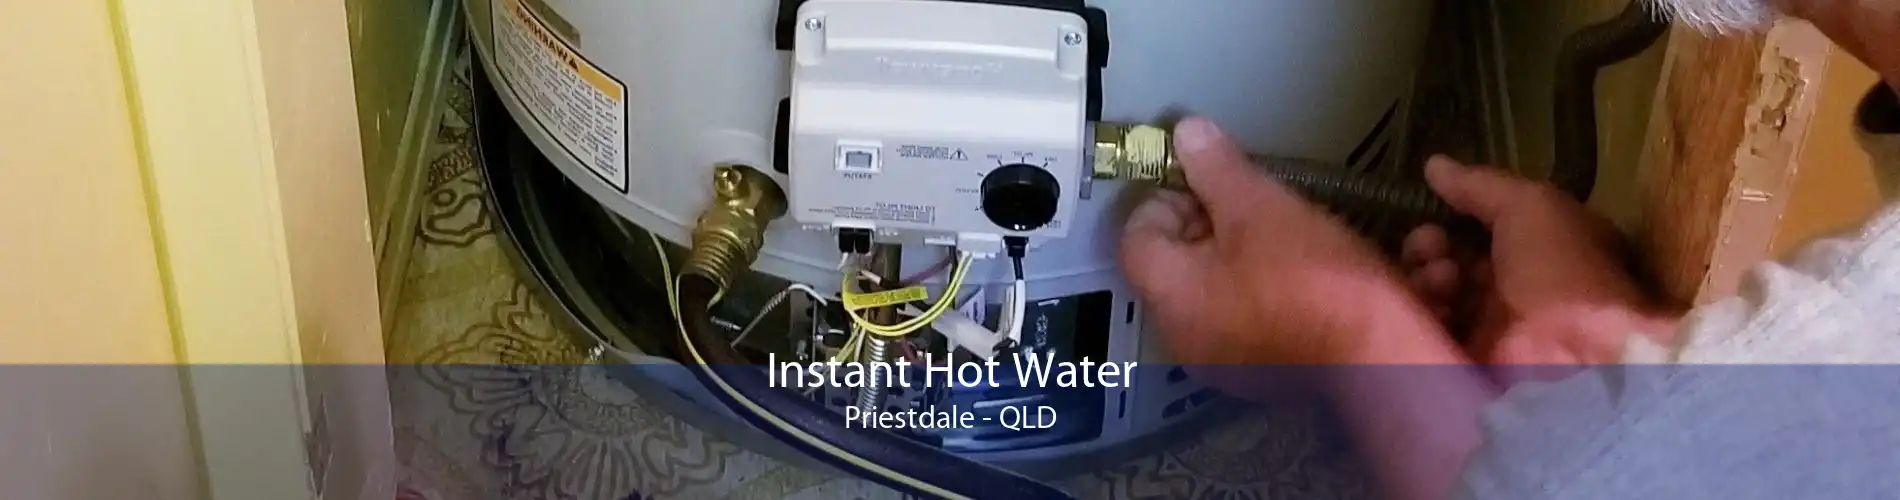 Instant Hot Water Priestdale - QLD